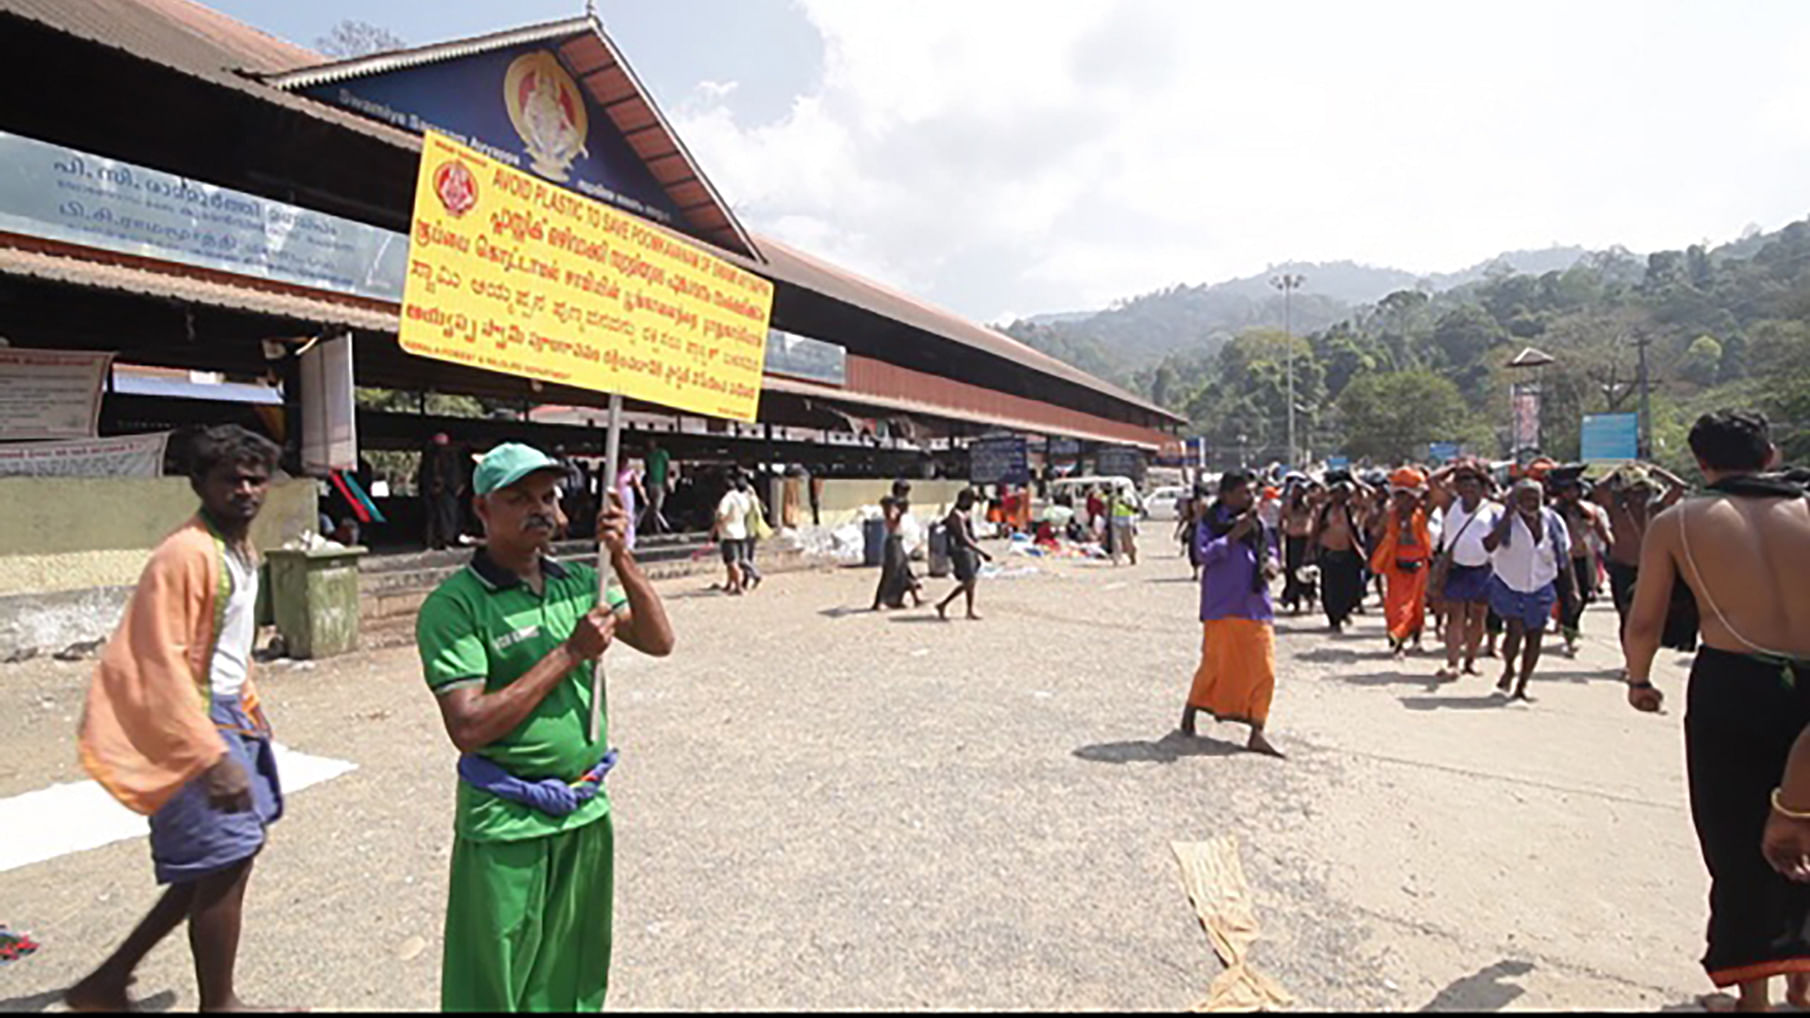 Volunteers holding out banners asking people not to throw plastic in the Pamba river. (Photo: <a href="http://missiongreensabarimala.com/uploads/photos/563da05ce13f1-789e5f6ca30fb0a4333700cd0e159765-1000x_.jpg">Mission Green Sabarimala</a>)